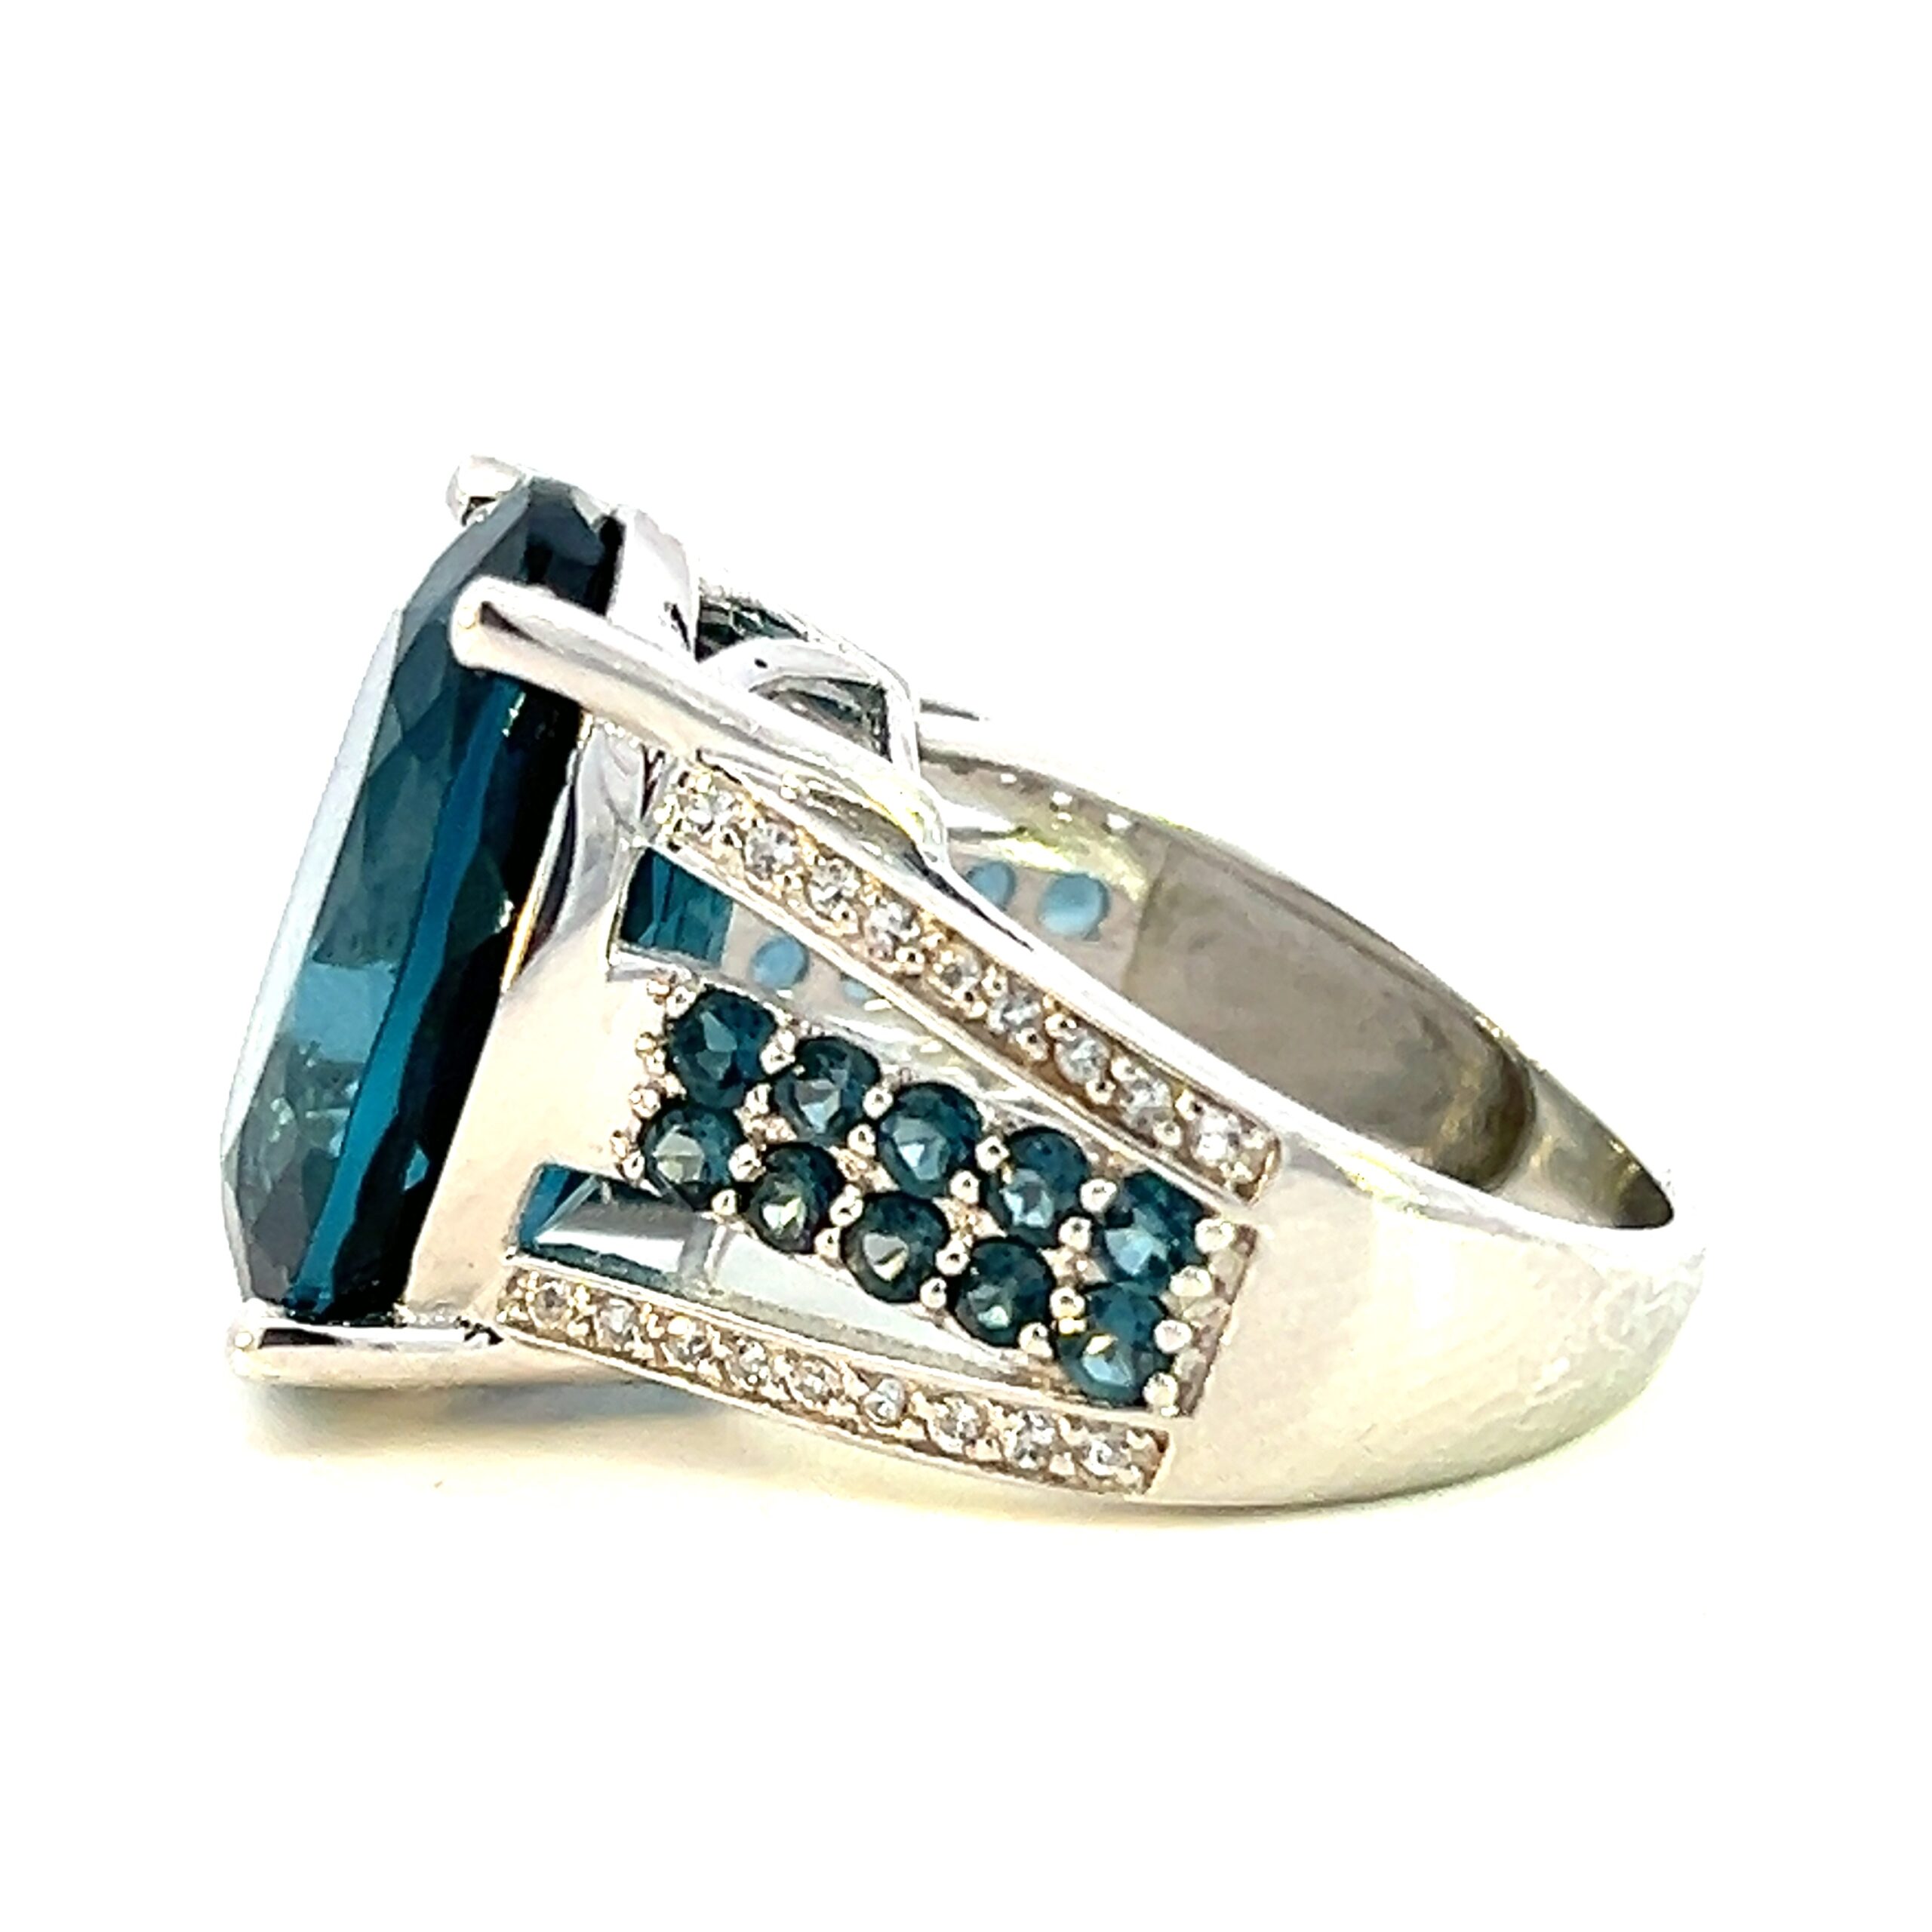 One estate sterling silver London blue topaz ring containing a center 17.5x13mm oval London blue topaz. The ban contains 4 rows of stones including 2 outer rows of 1mm round white sapphires and 2 inner rows of 2mm round London blue topazes. The band has a double split shank that separates the sapphires and topazes.